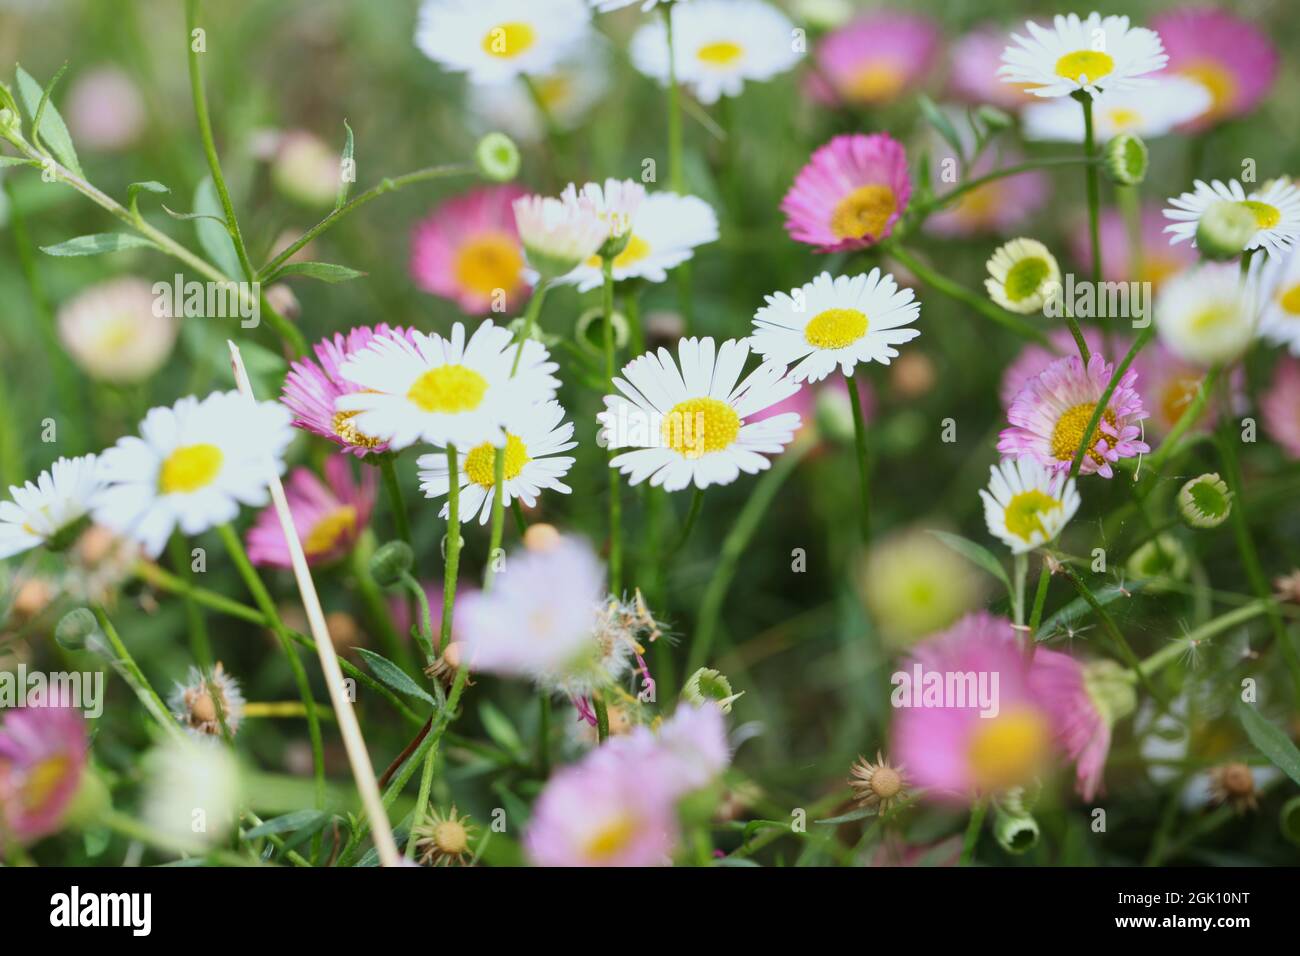 Close-up of Pink and White yellow-centred blooms of Alpine Asters / Aster alpinus Stock Photo